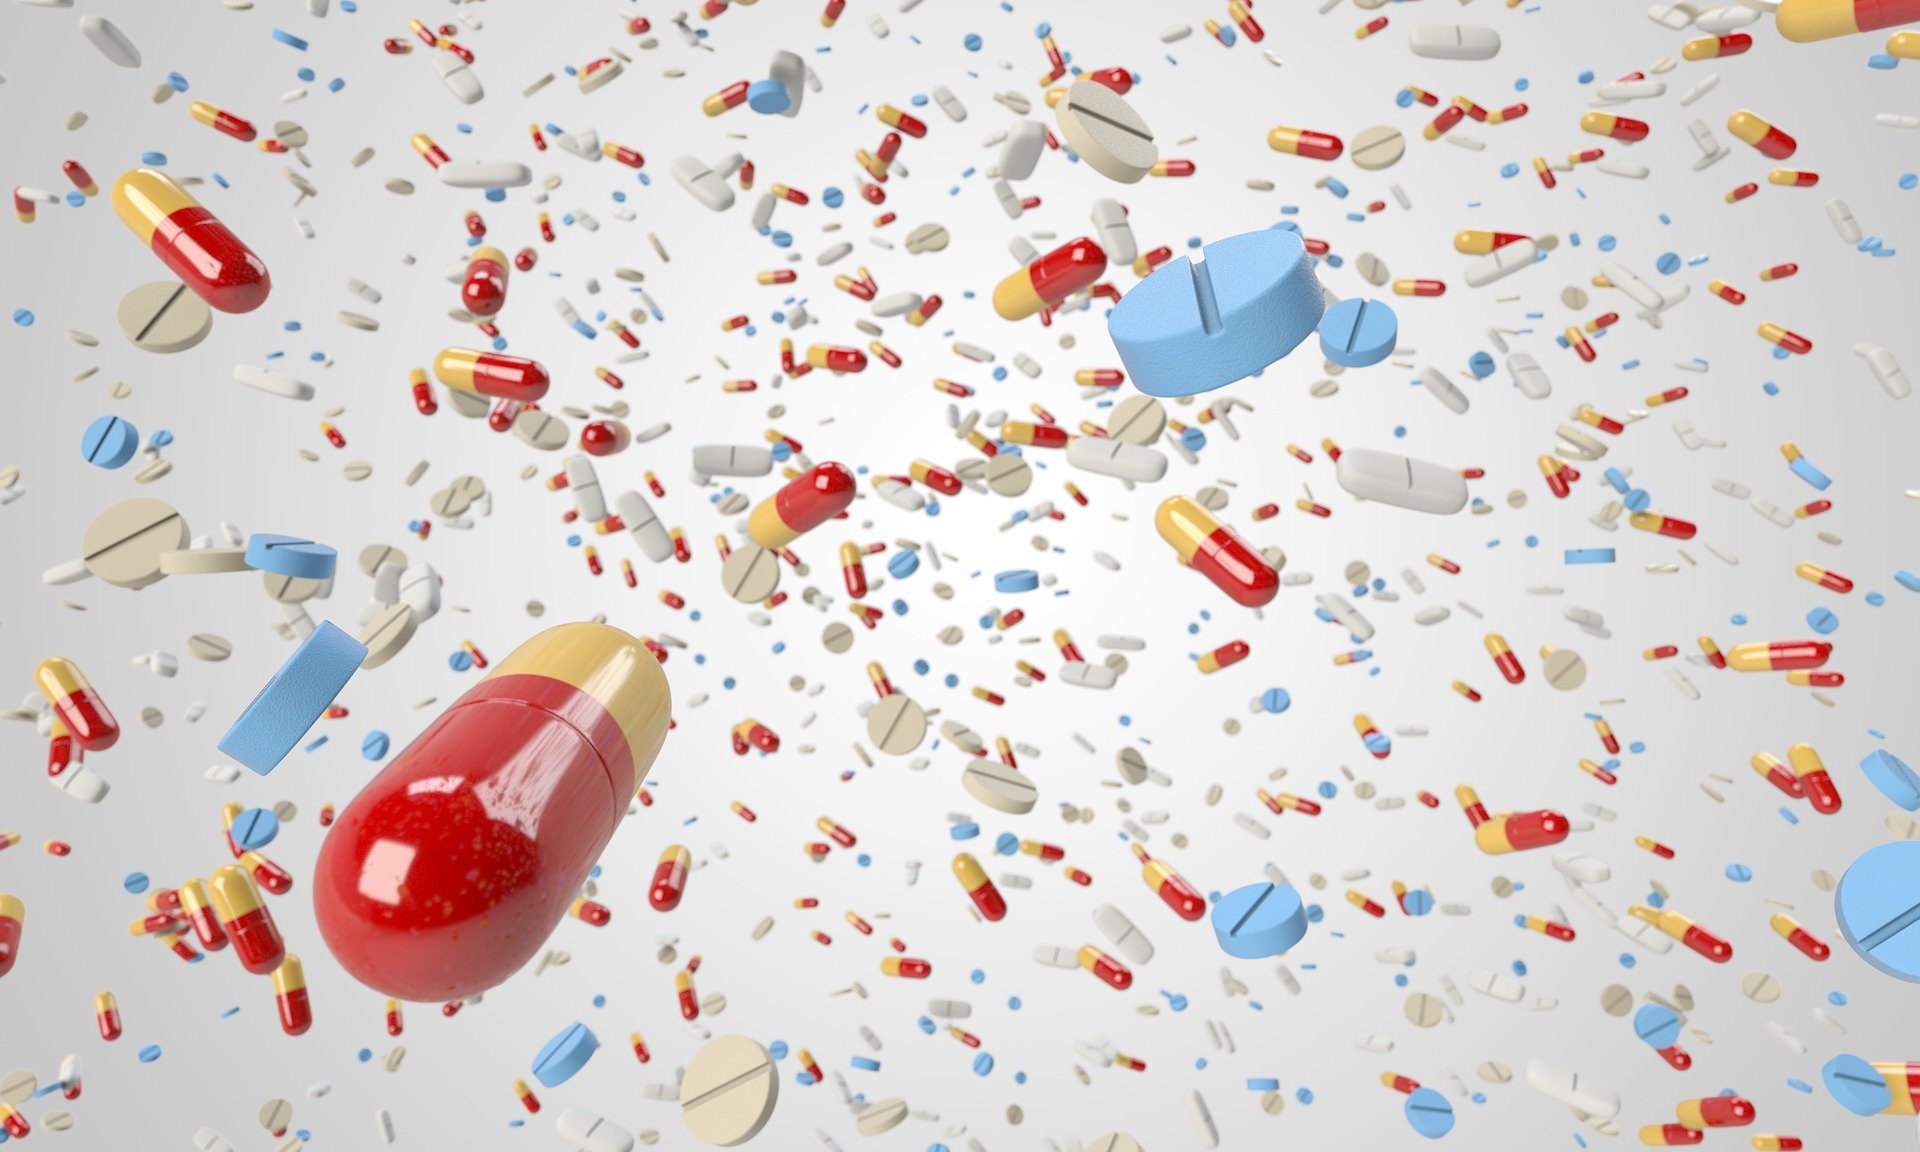 pills - Medical Treatments That Can Have Dire Consequences for Seniors